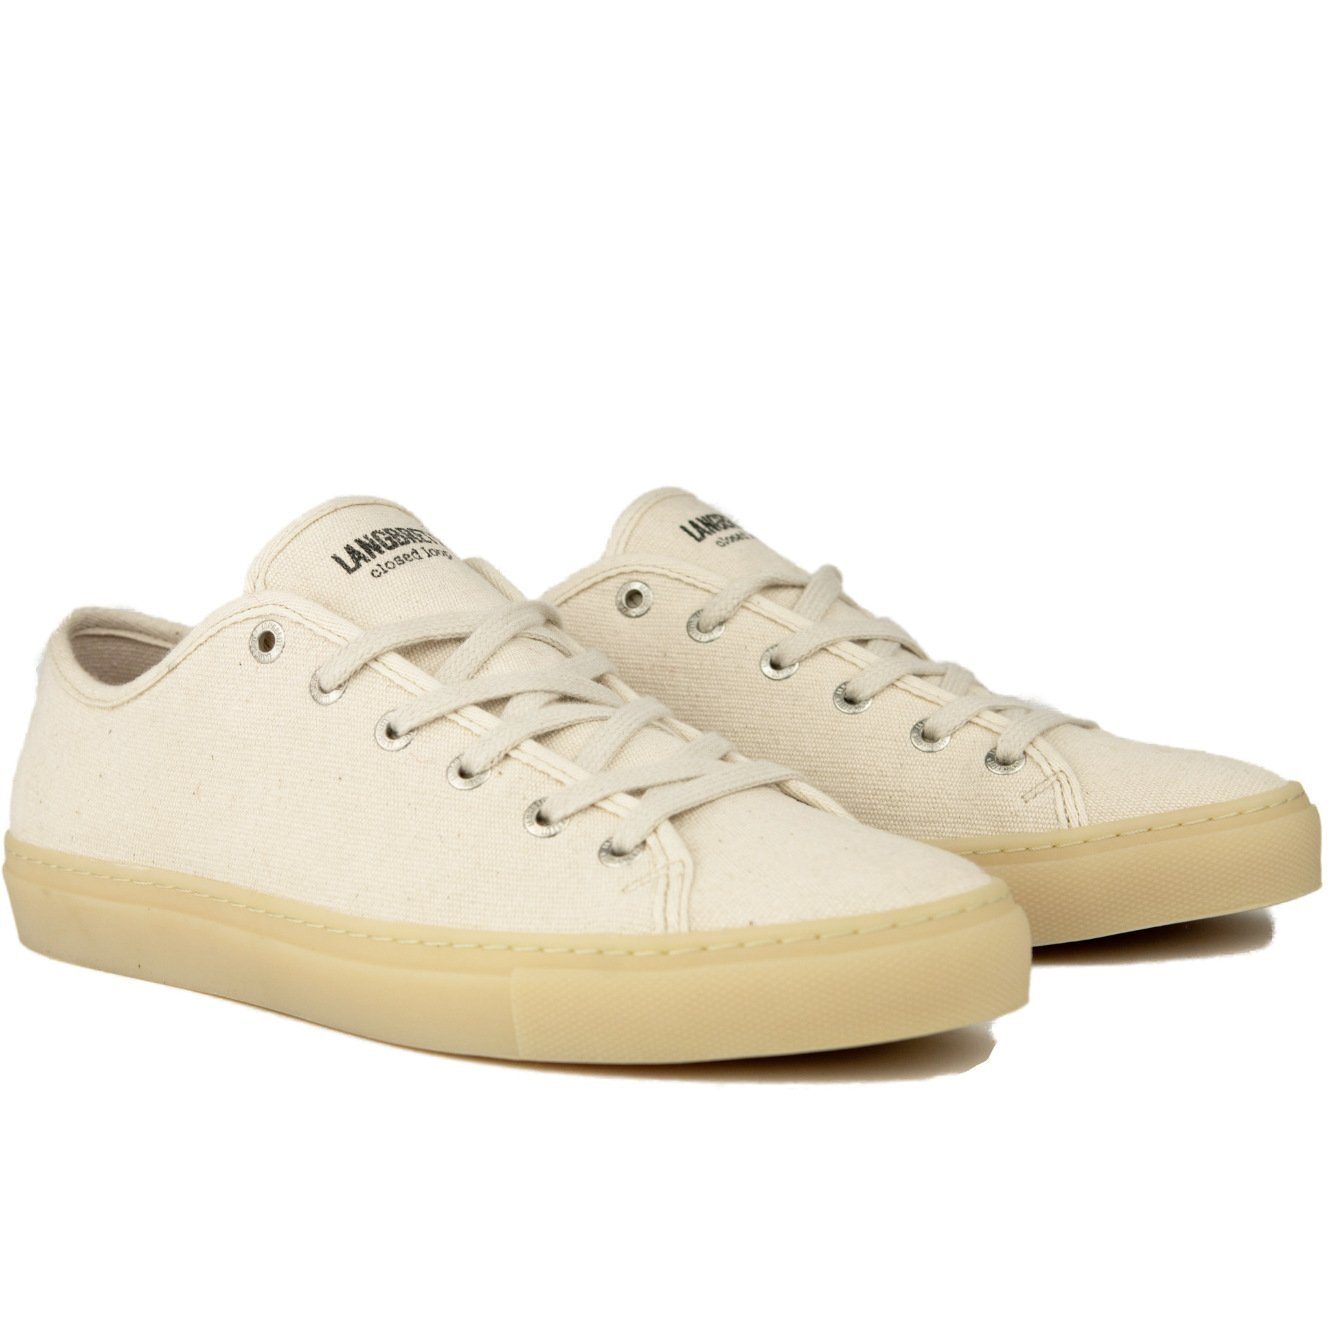 Langbrett SUM - Unisex Ecological Shoes - Made From Recycled Cotton White Shoes